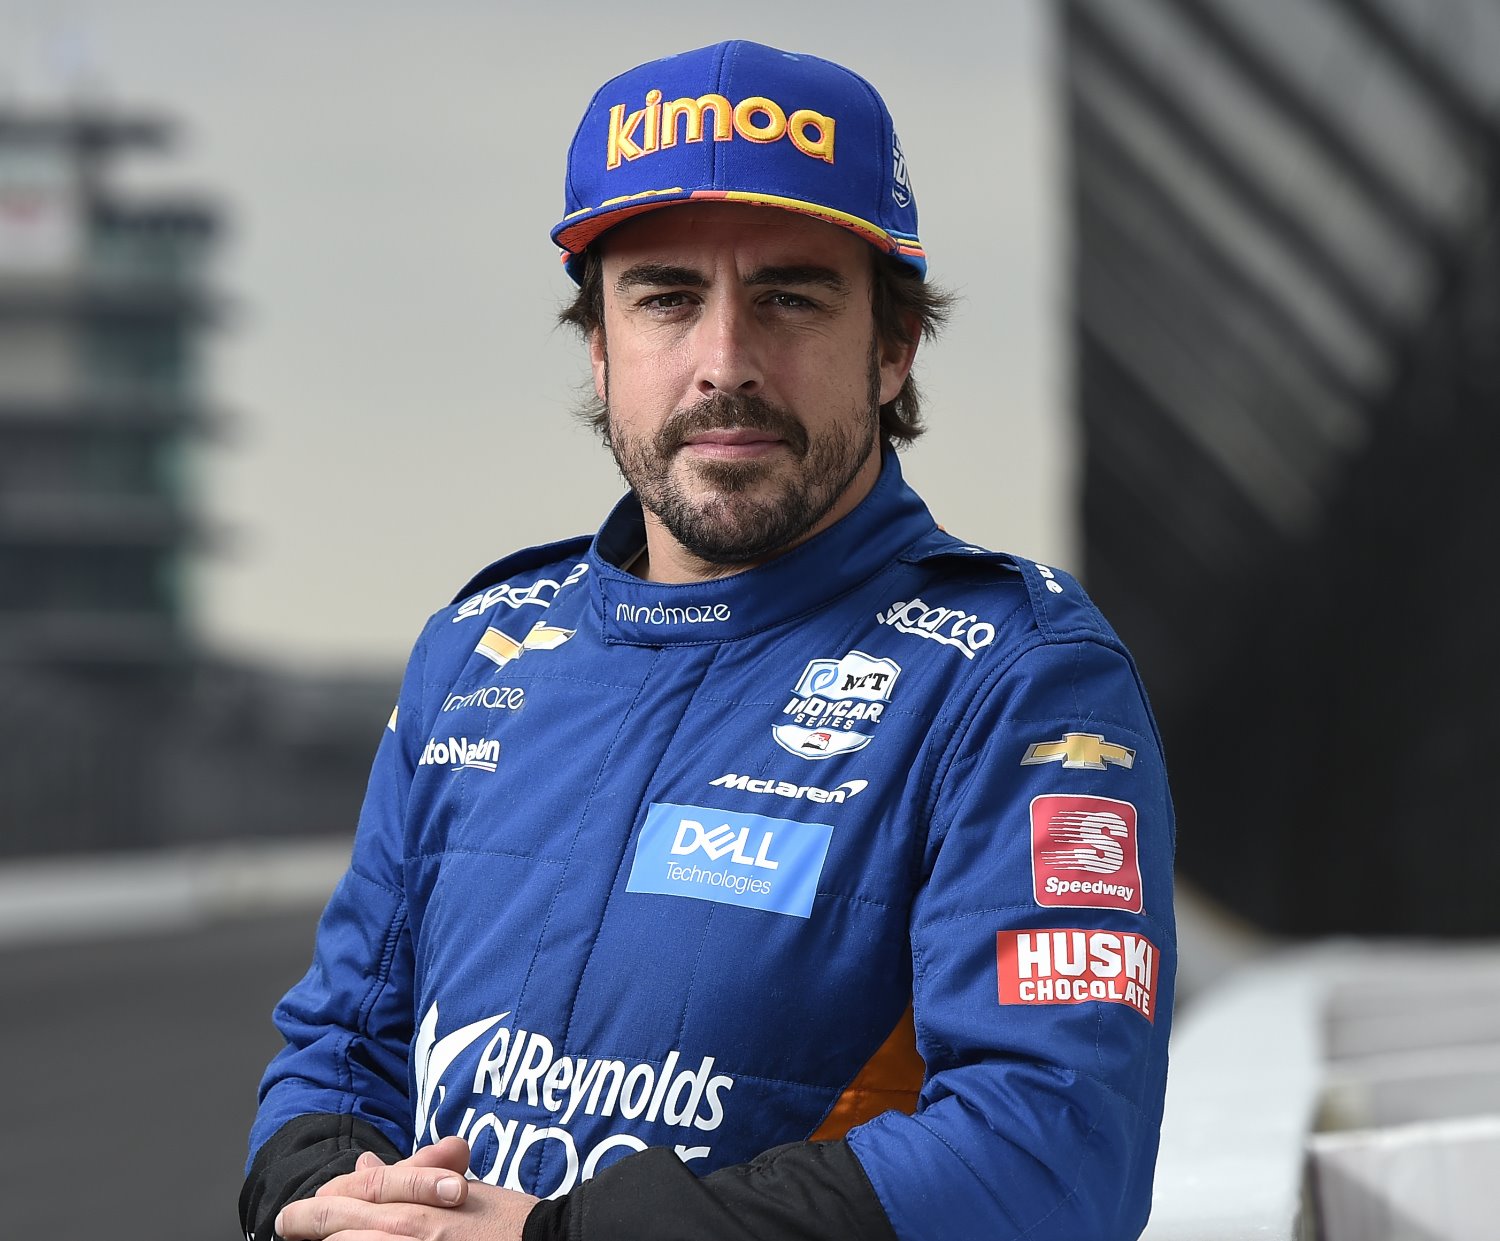 Alonso plans Indy 500 return, likely without McLaren